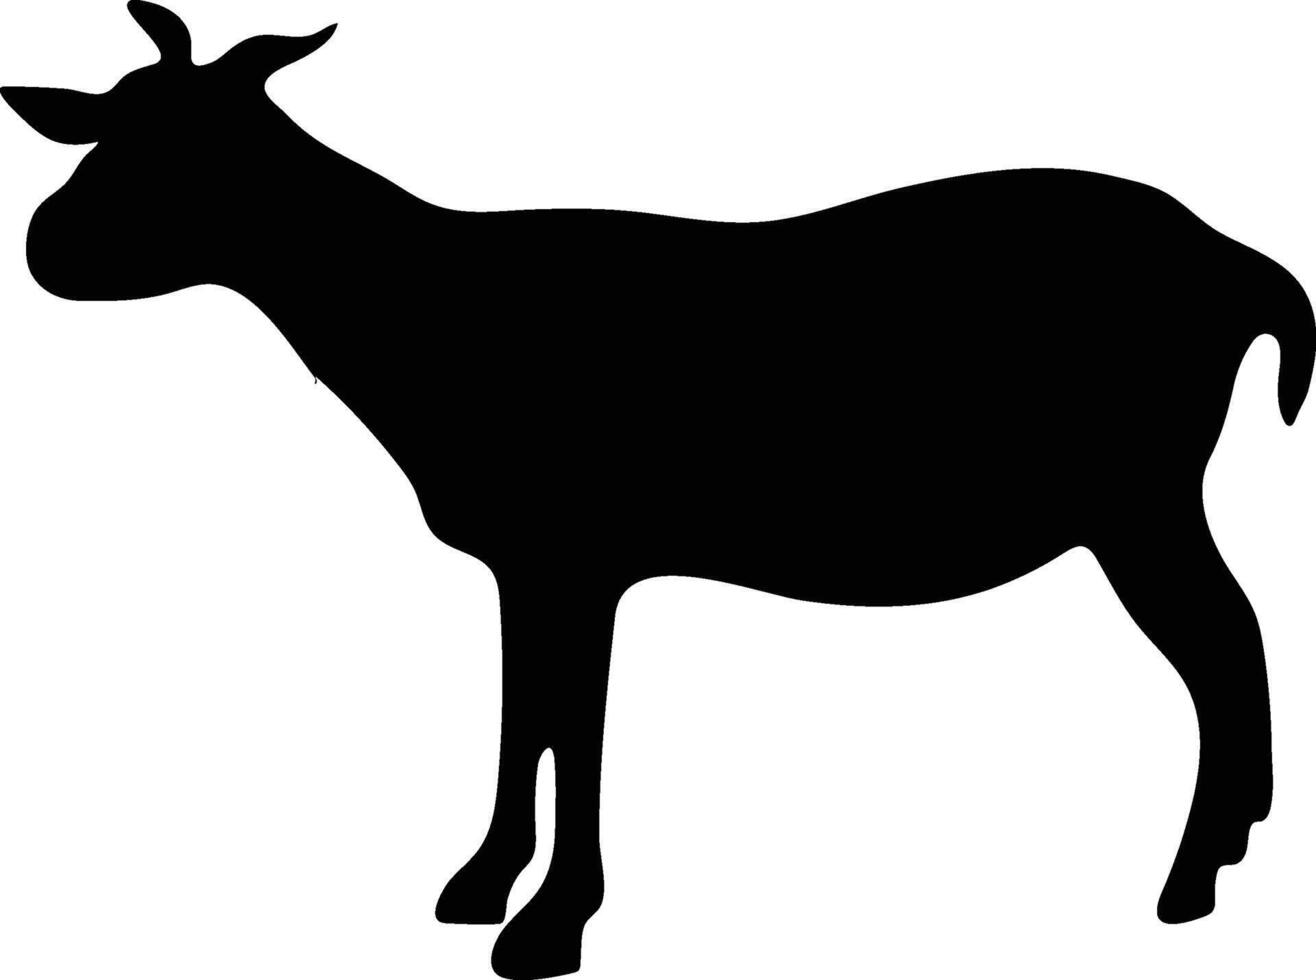 Goats Roaming in Countryside vector or silhouette